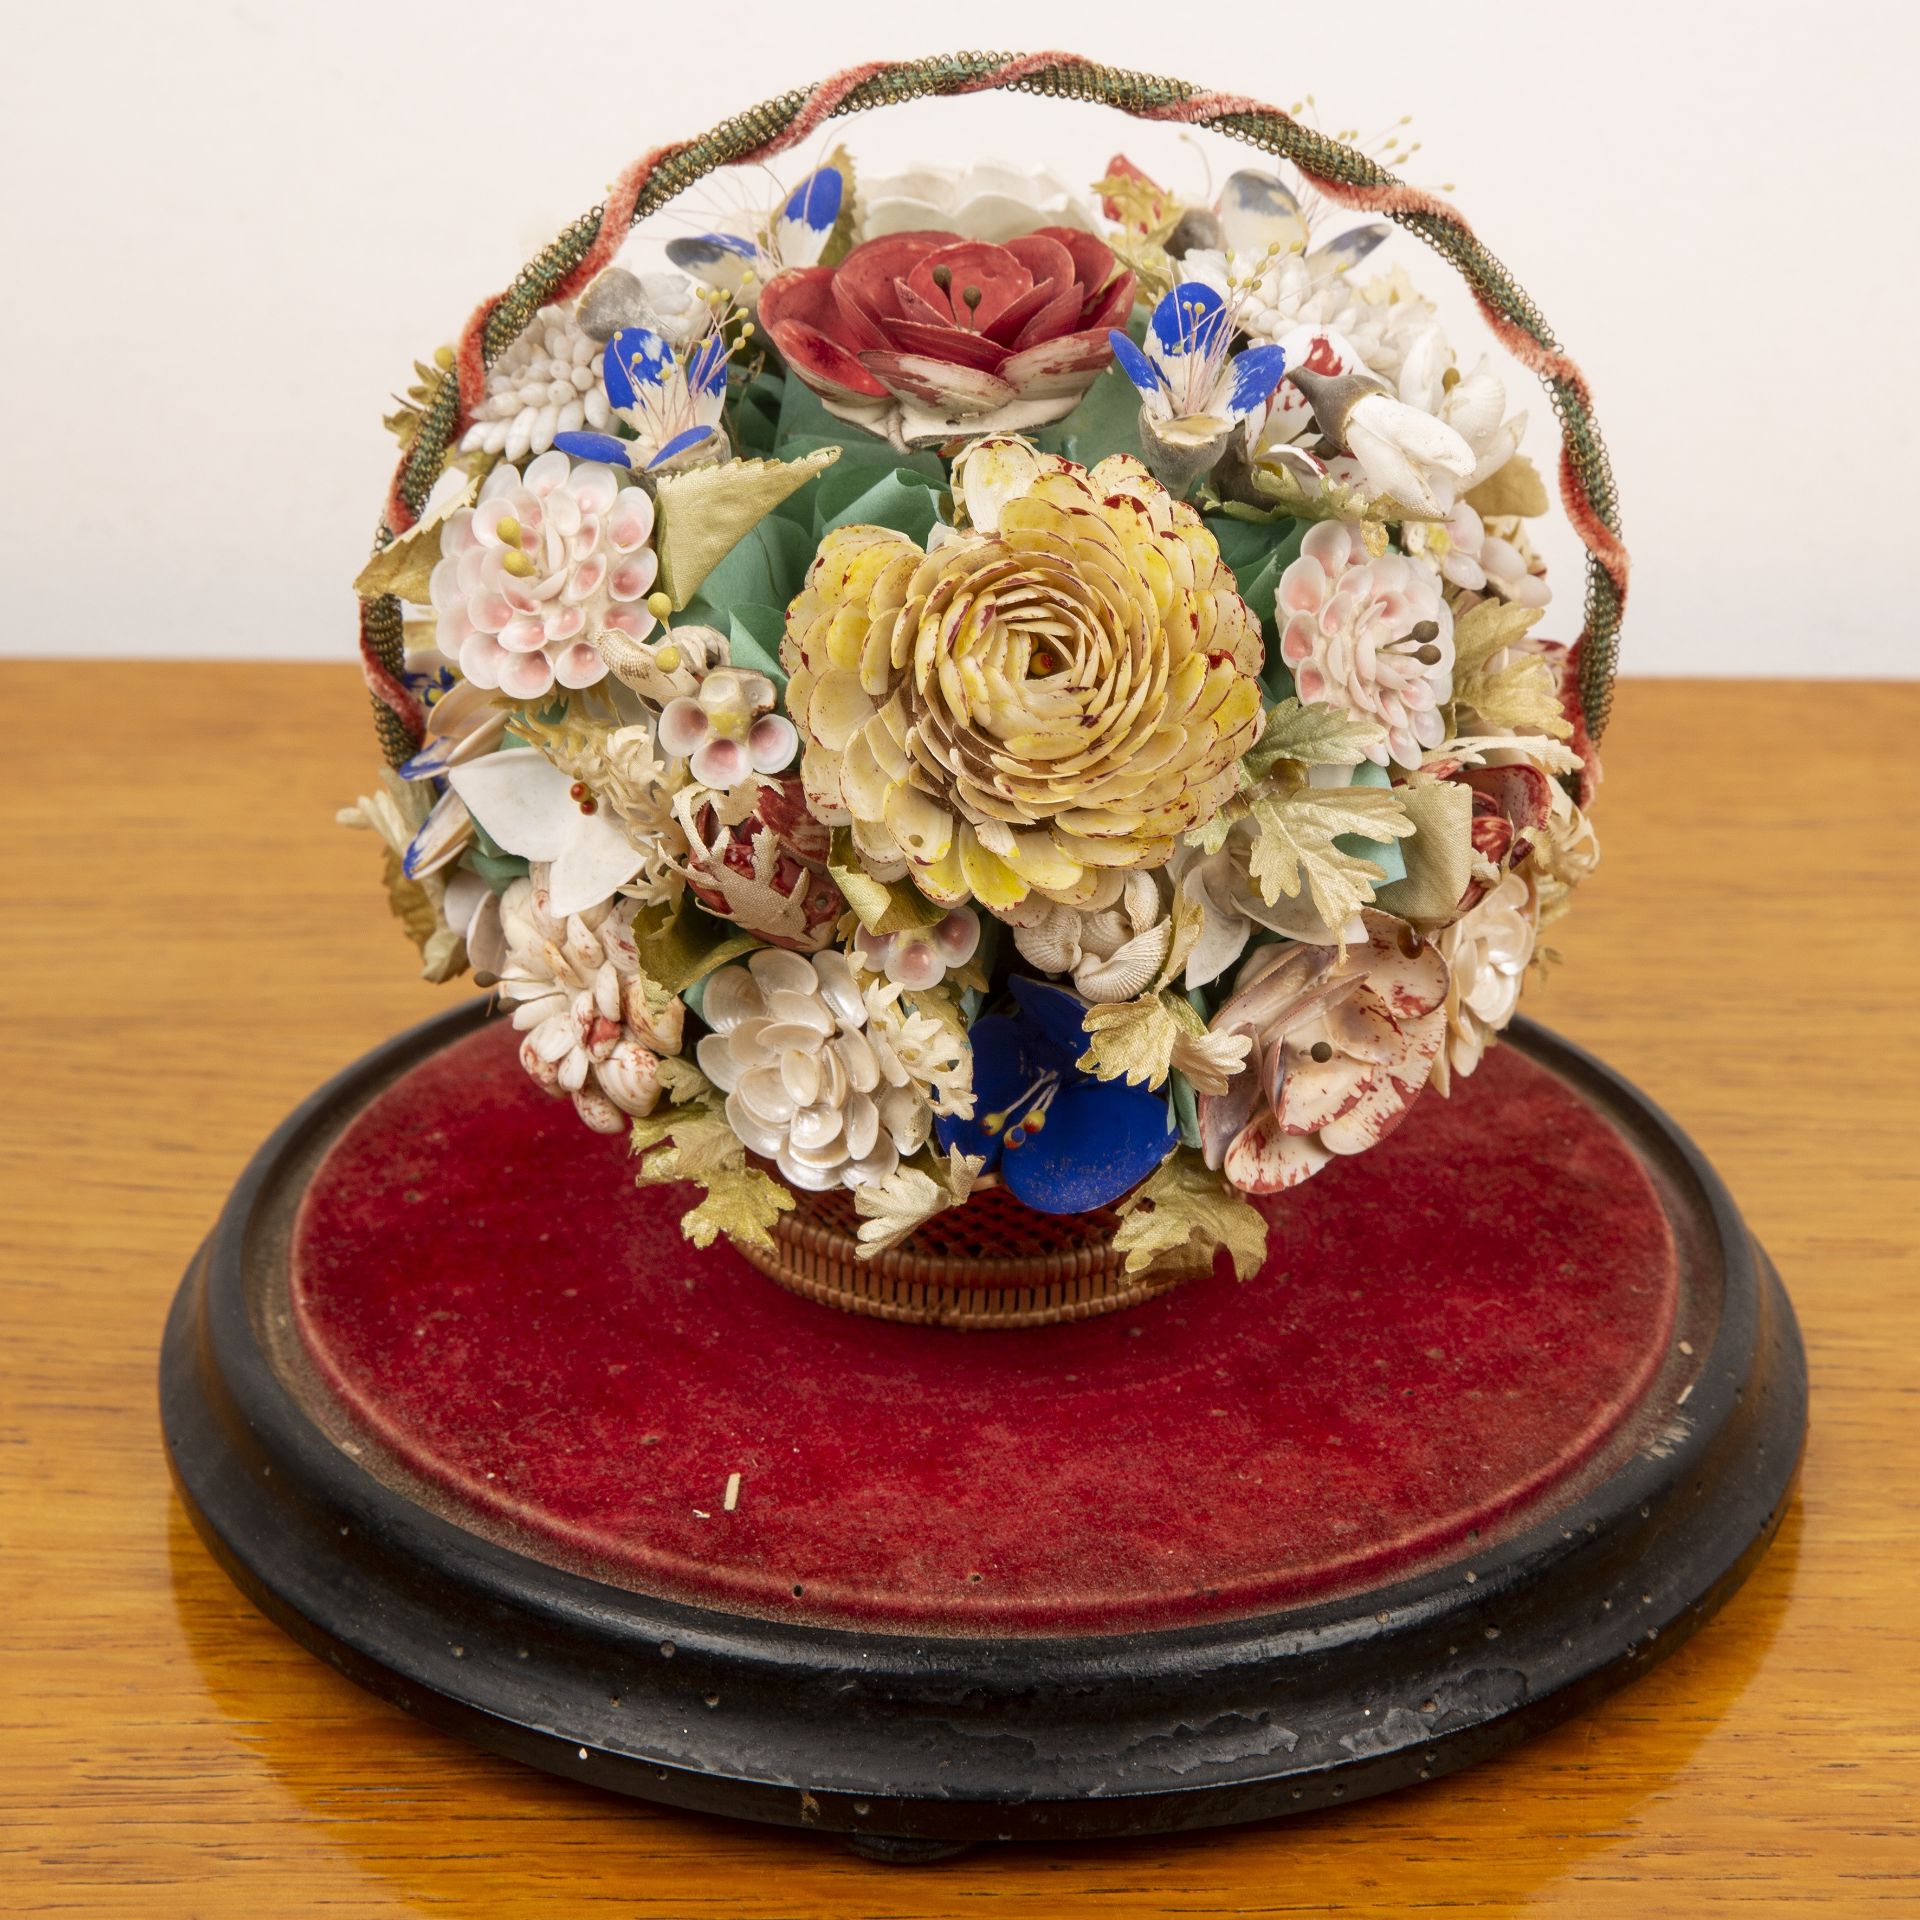 Sailors sweetheart or valentine Victorian or later, depicting a basket of flowers, woven basket with - Image 3 of 3